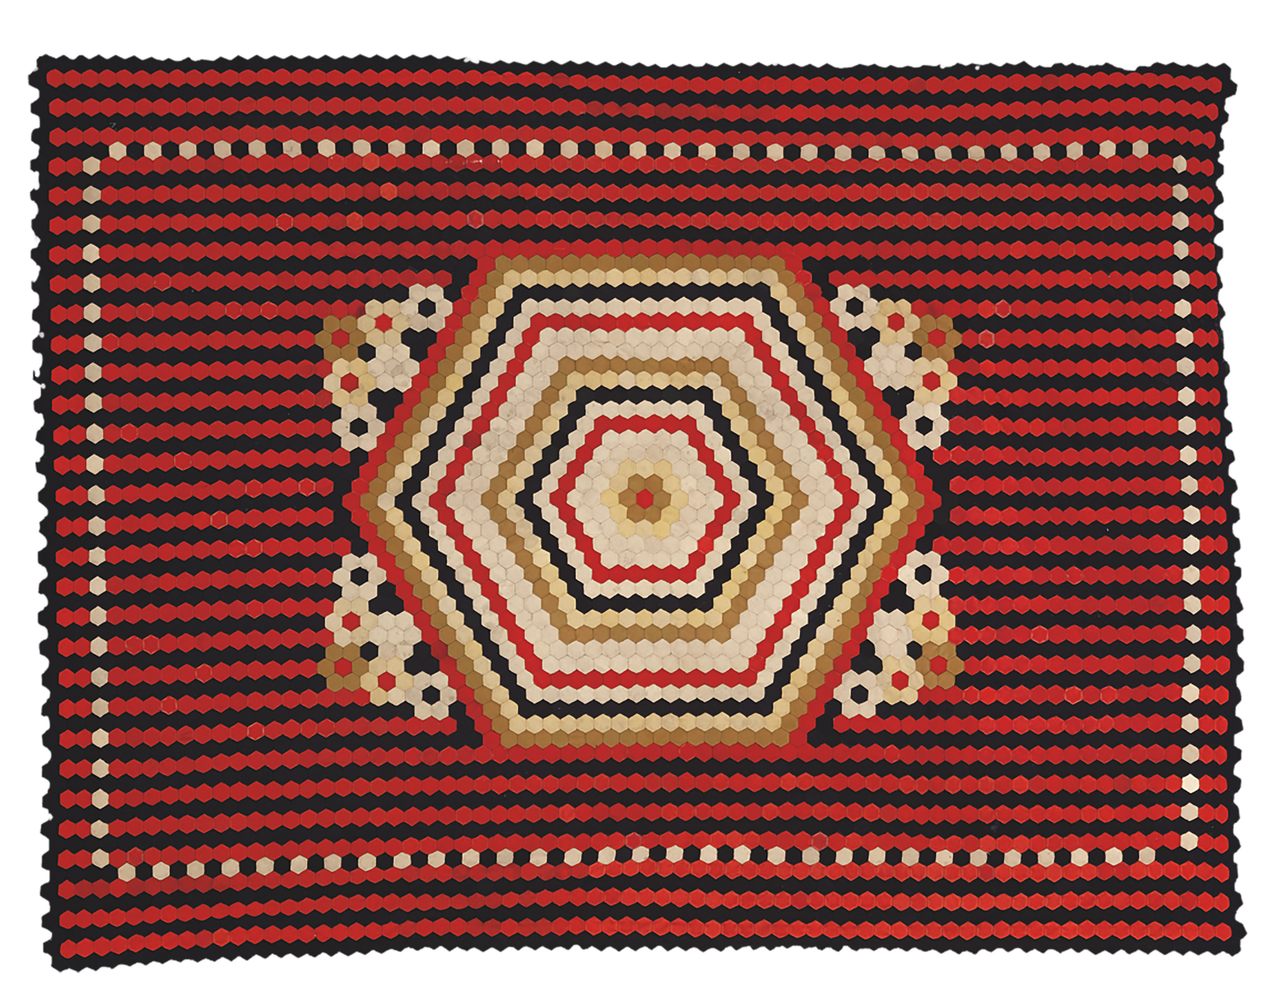 This quilt was made by an unknown artist, likely in Crimea in the 19th century. It's a relatively simple quilt, requiring straightforward sewing and construction skills.